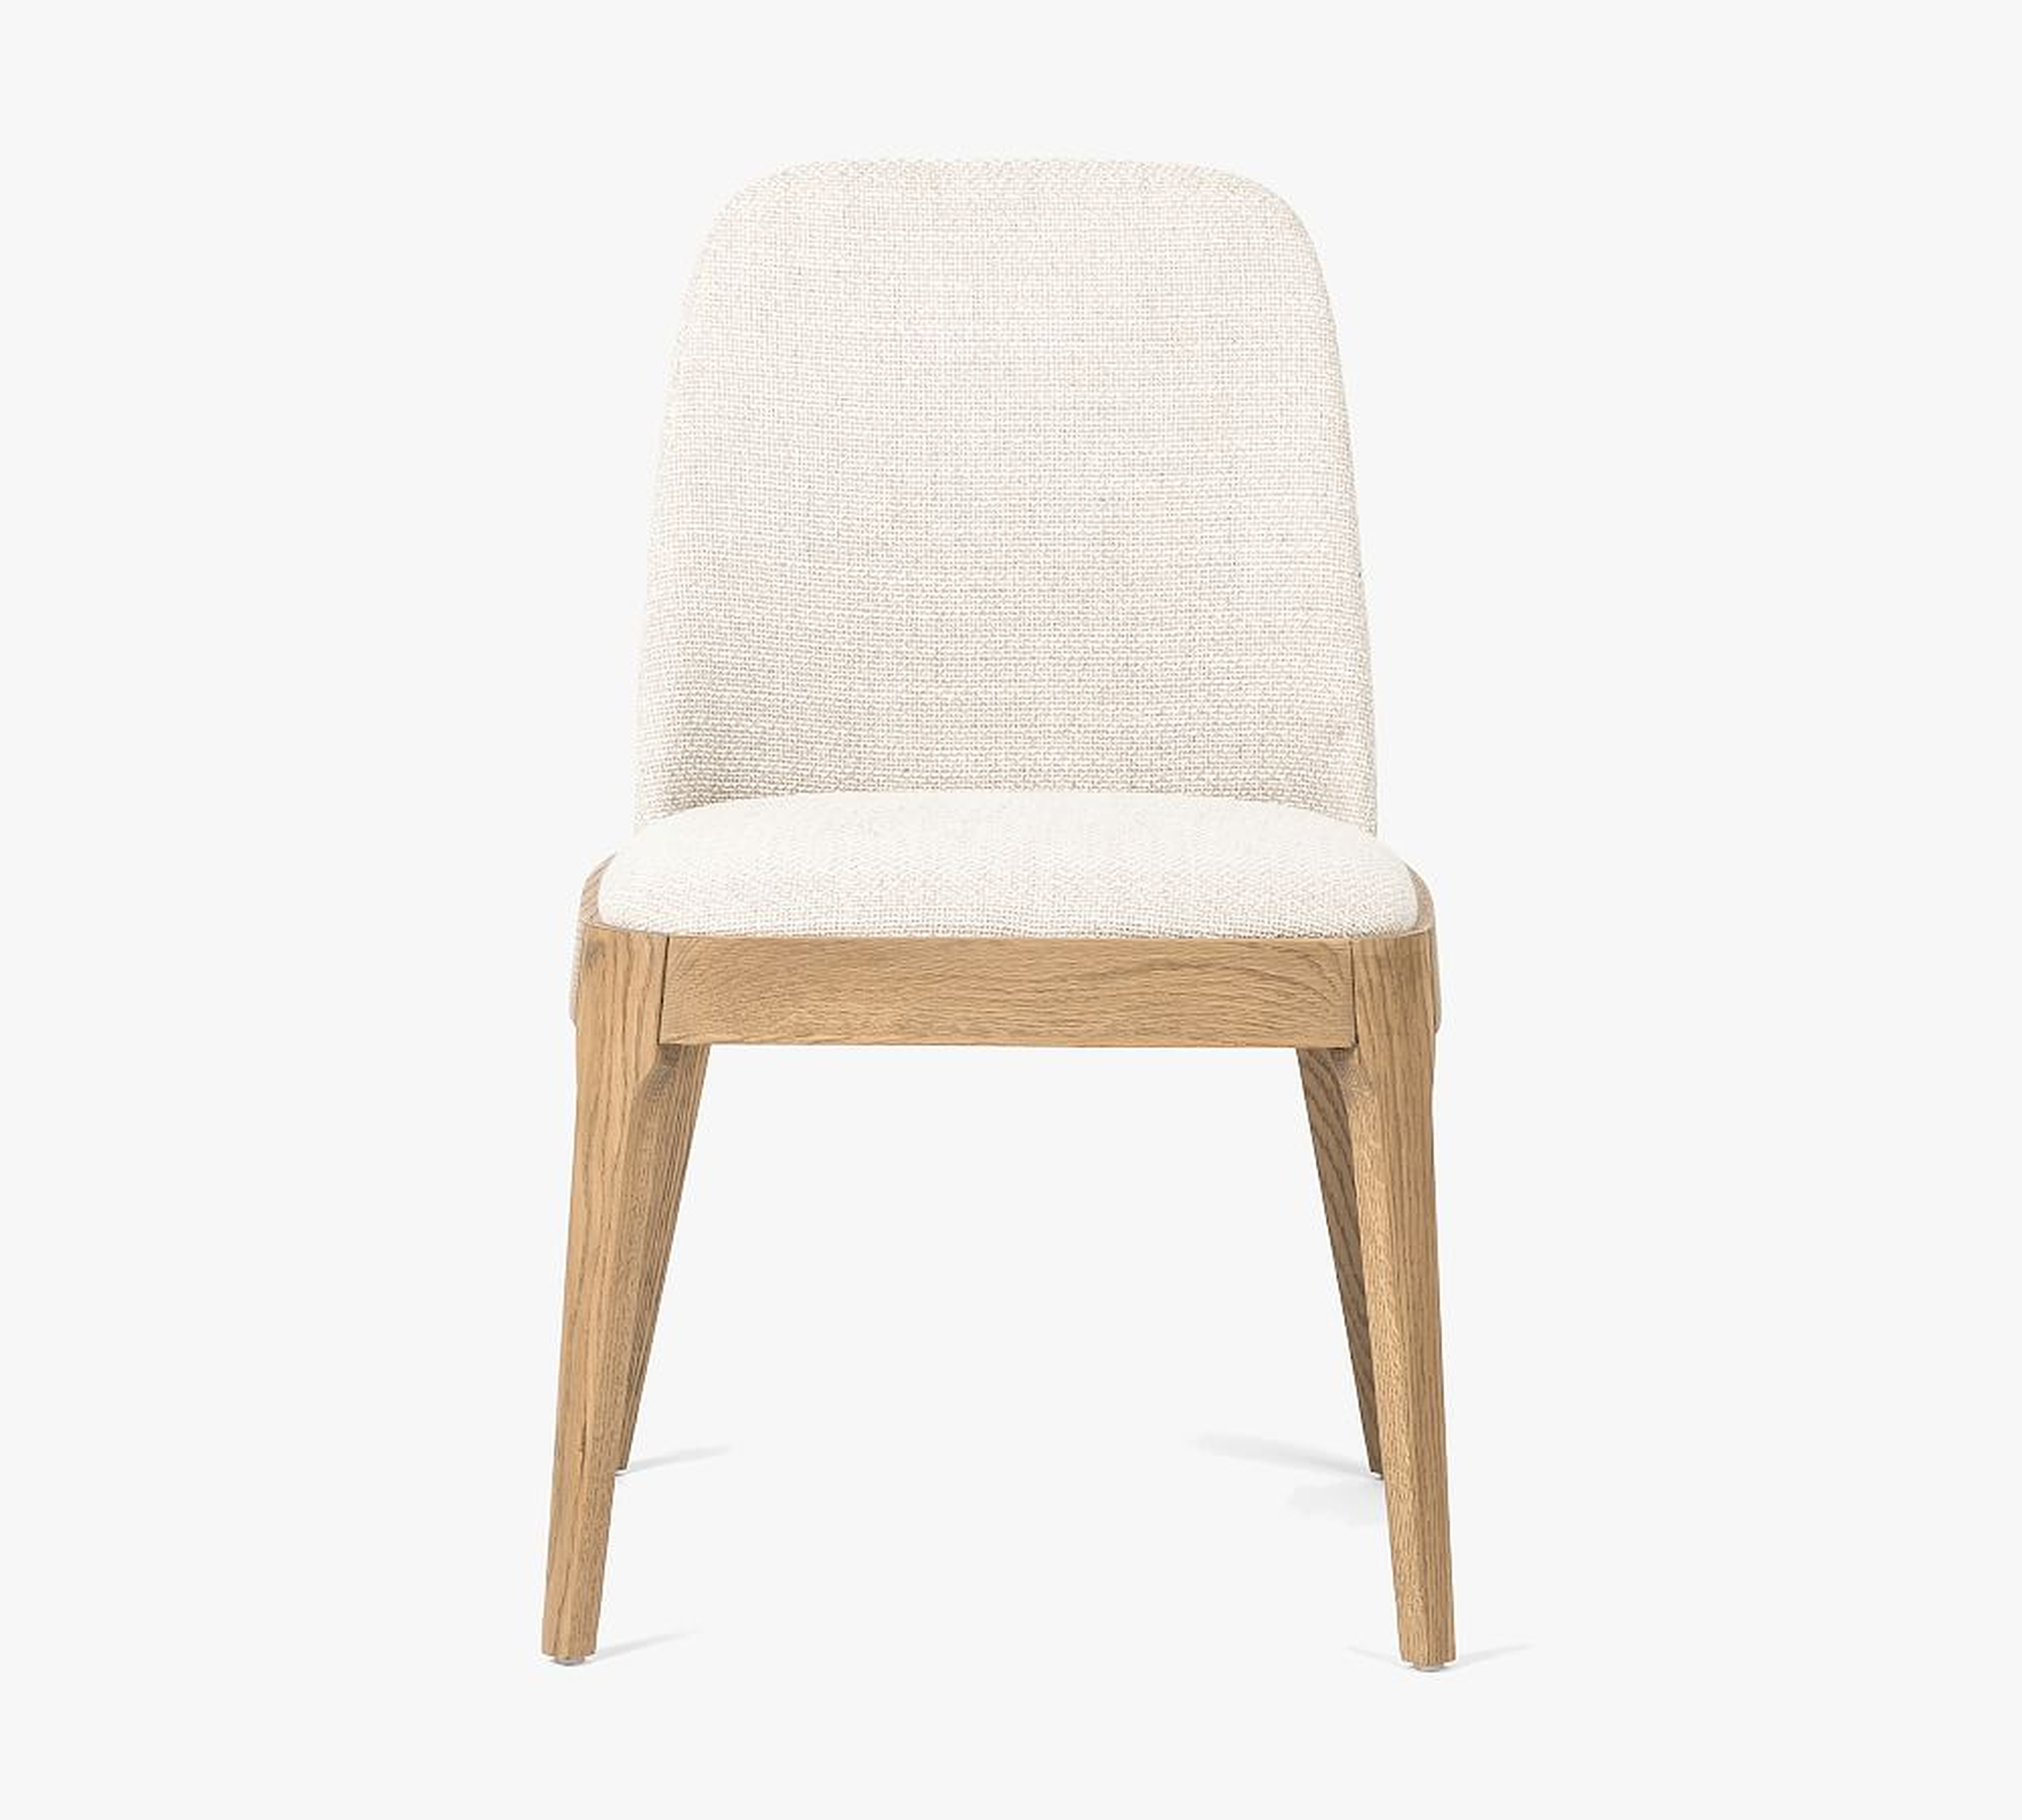 Ryder Upholstered Dining Chair, Gibson Wheat - Pottery Barn